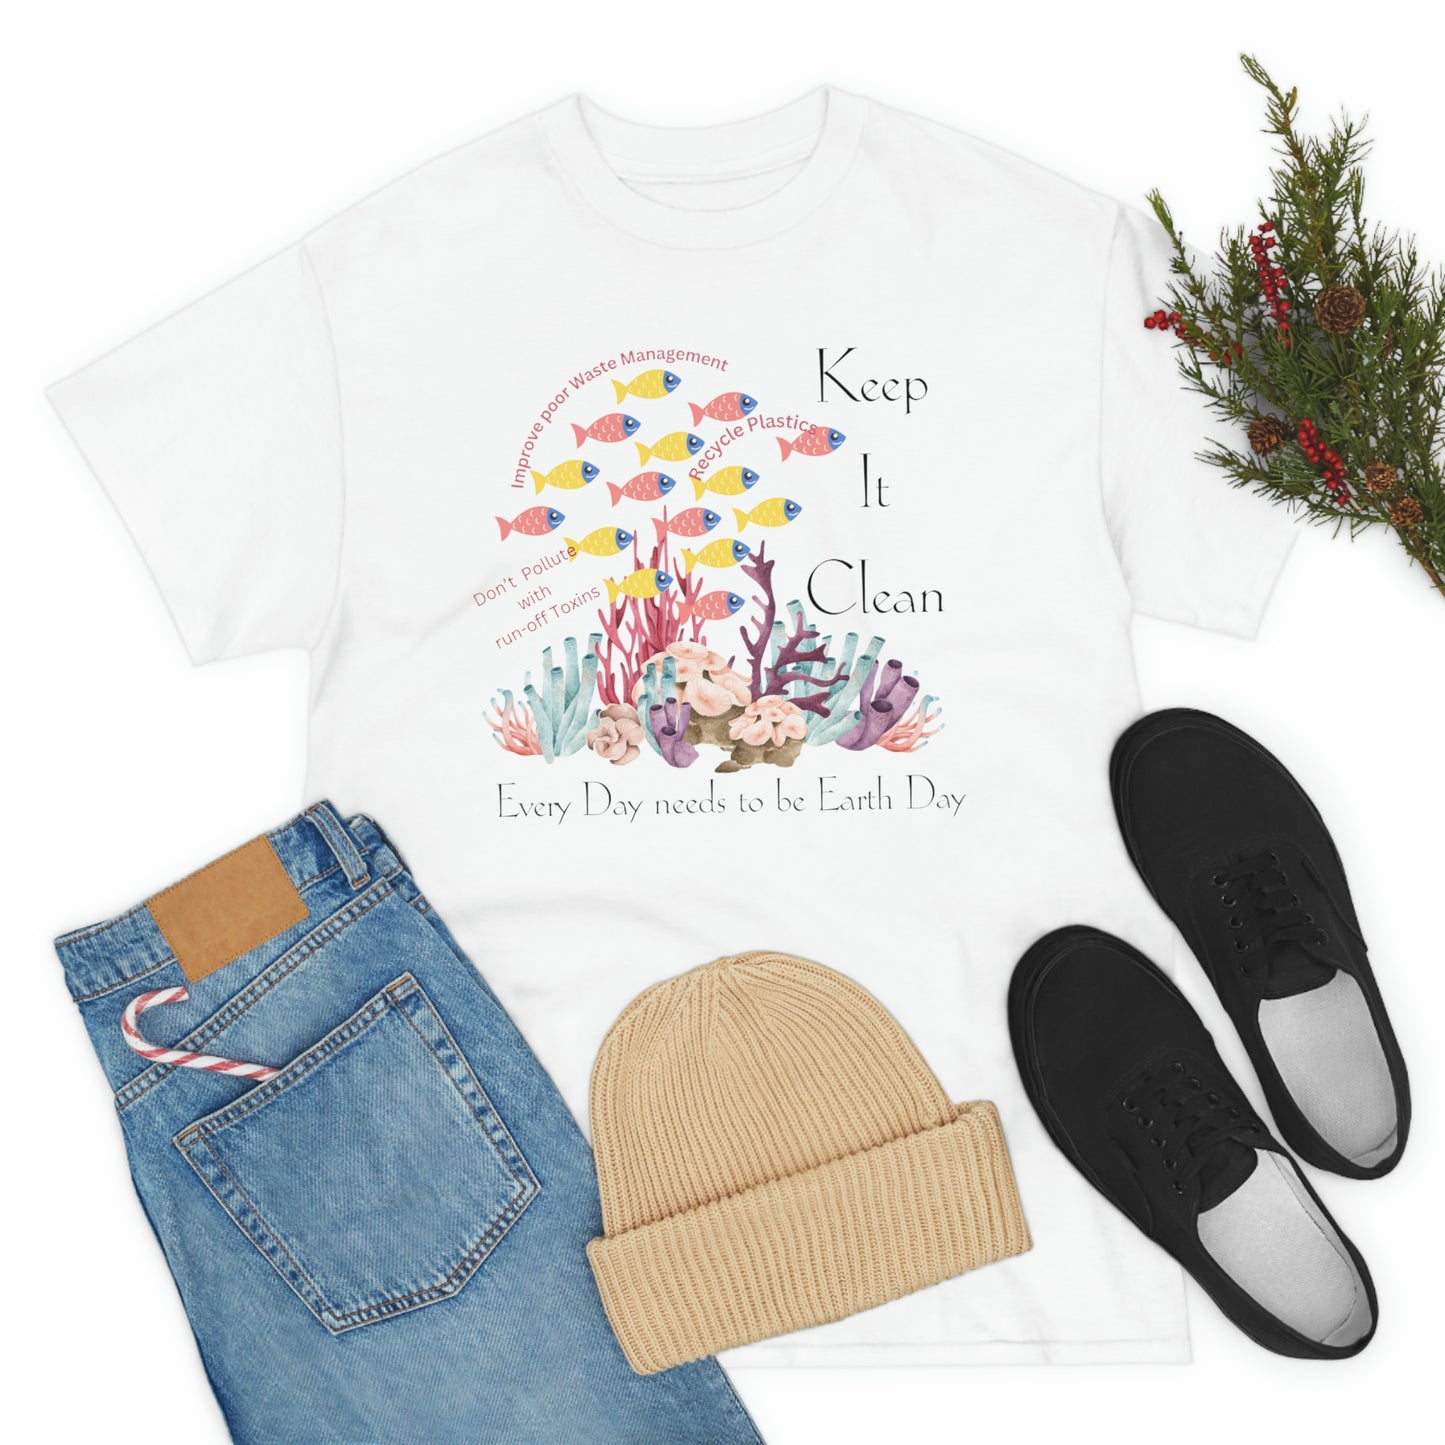 ‘Keep it Clean. Every day needs to be Earth Day’ Printed Front & Back. Unisex Heavy Cotton Tee